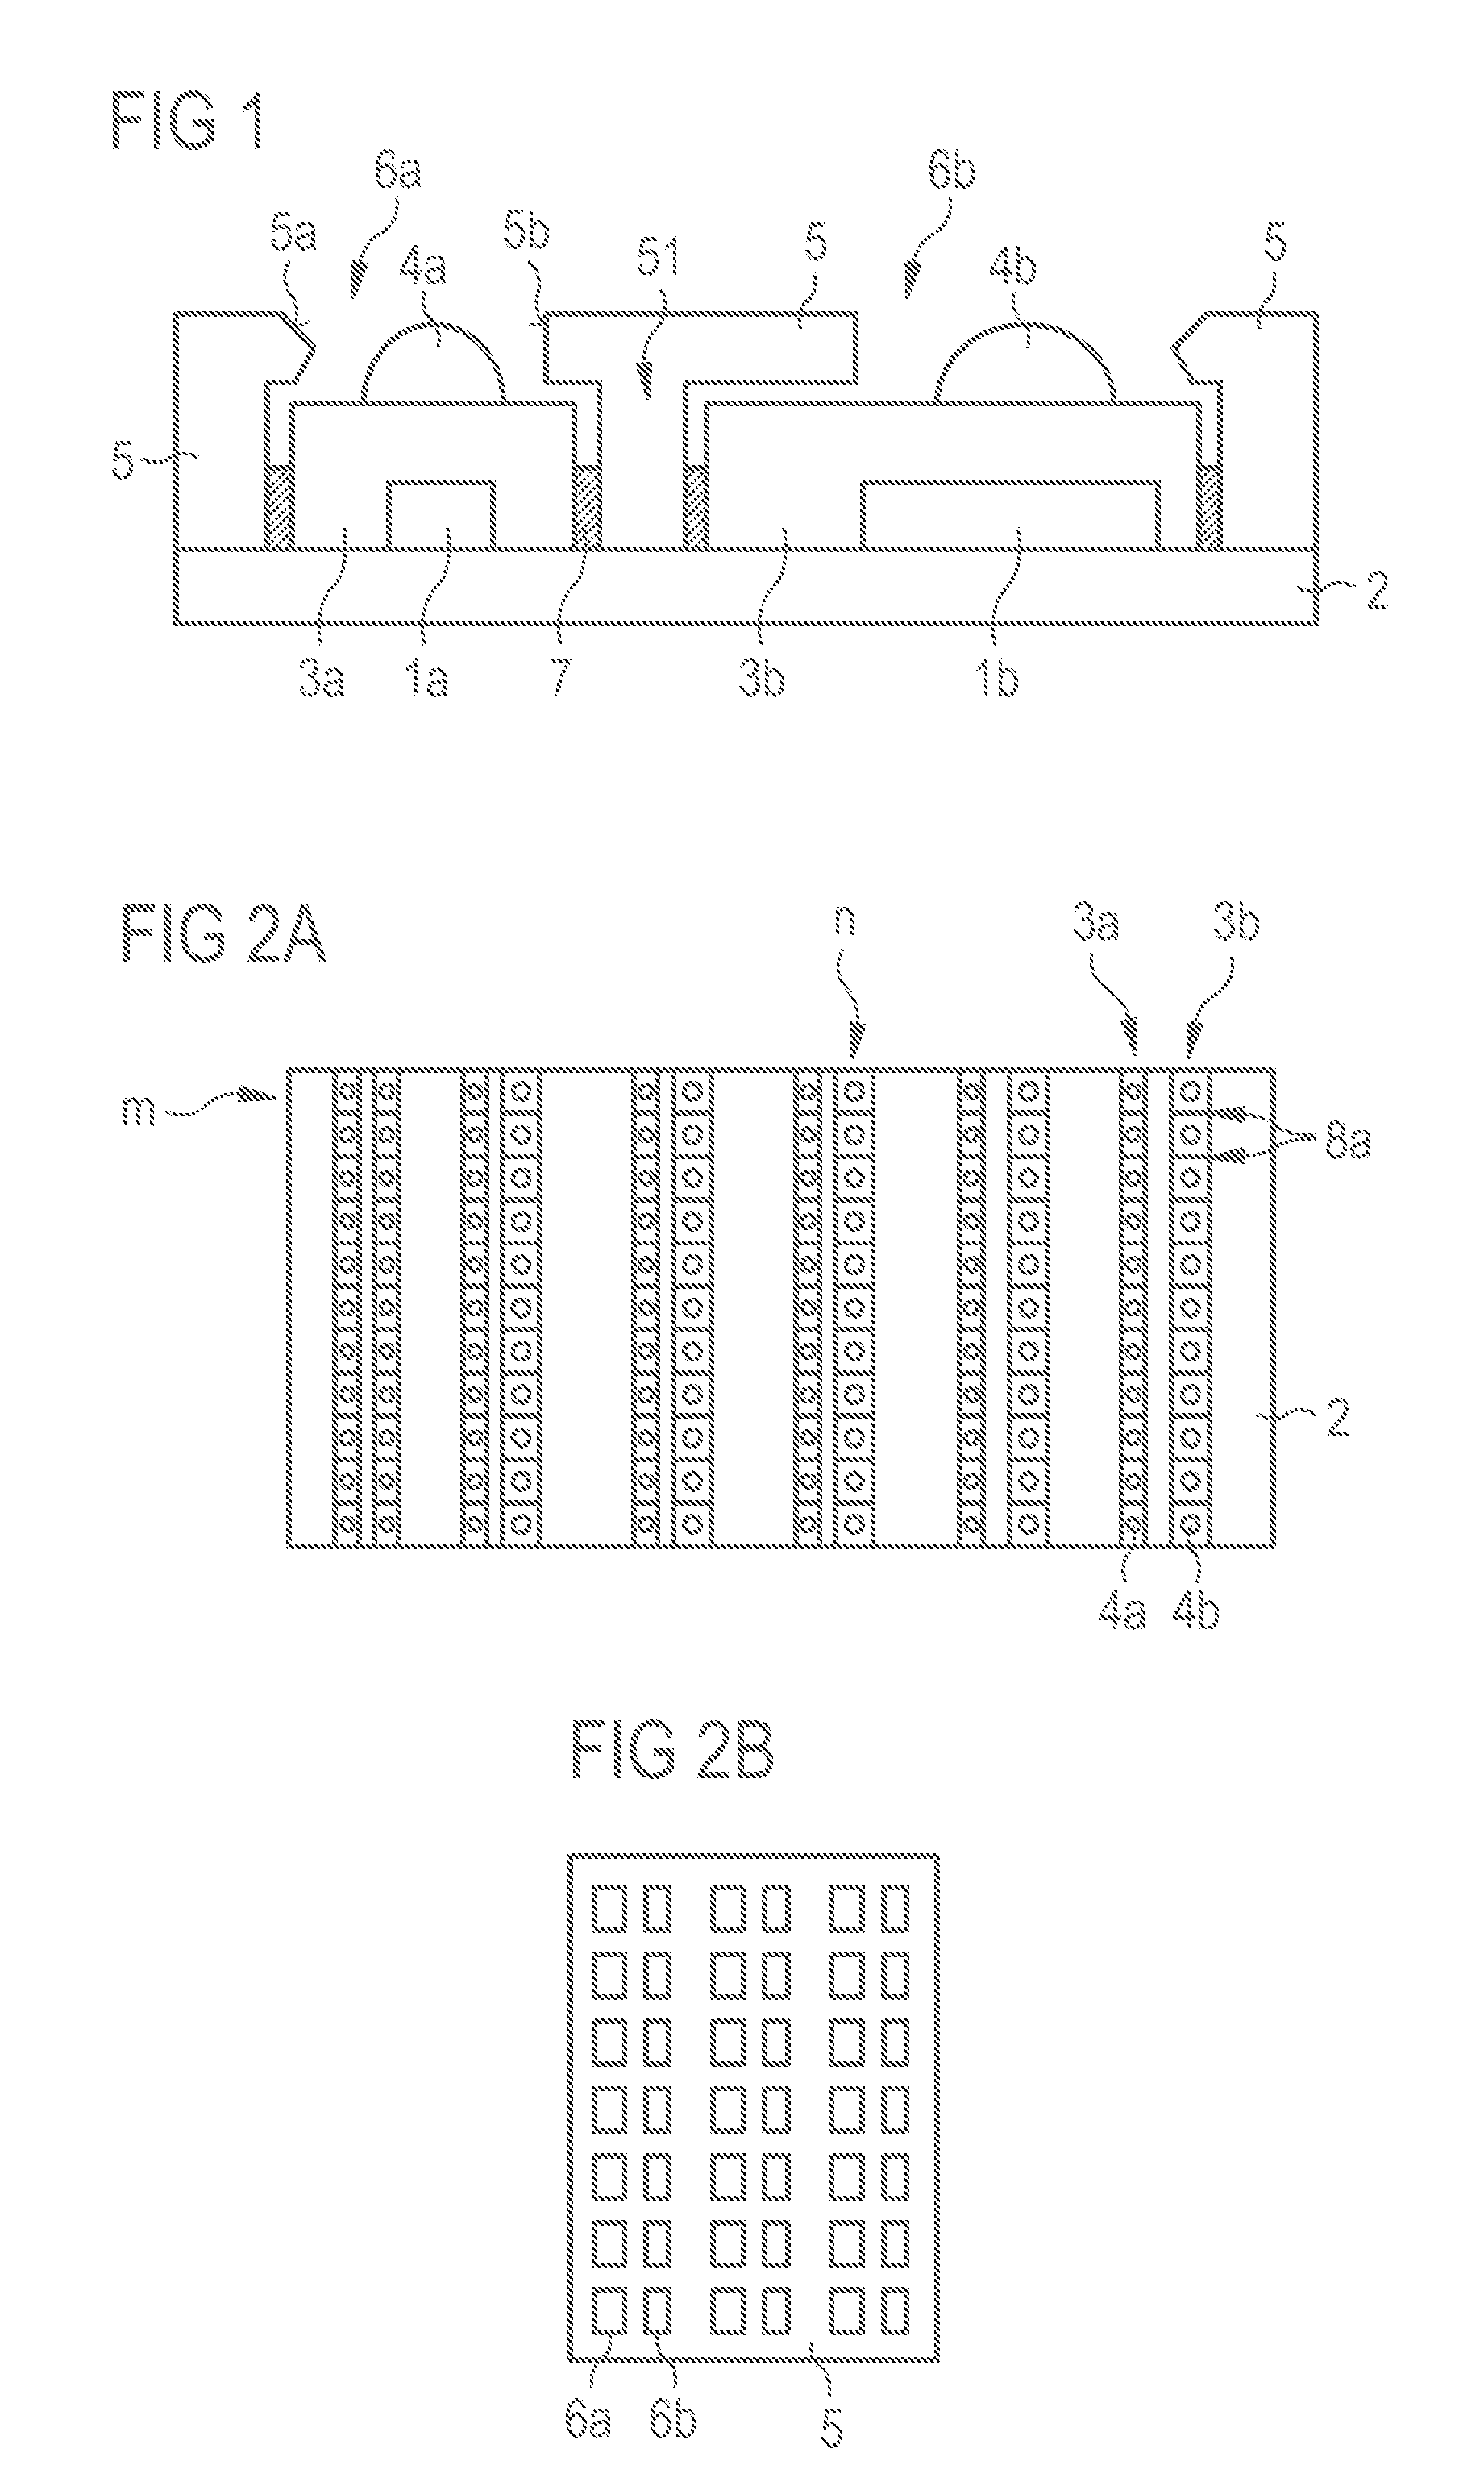 Method for Producing a Plurality of Optoelectronic Semiconductor Components in Combination, Semiconductor Component Produced in Such a Way, and Use of Said Semiconductor Component